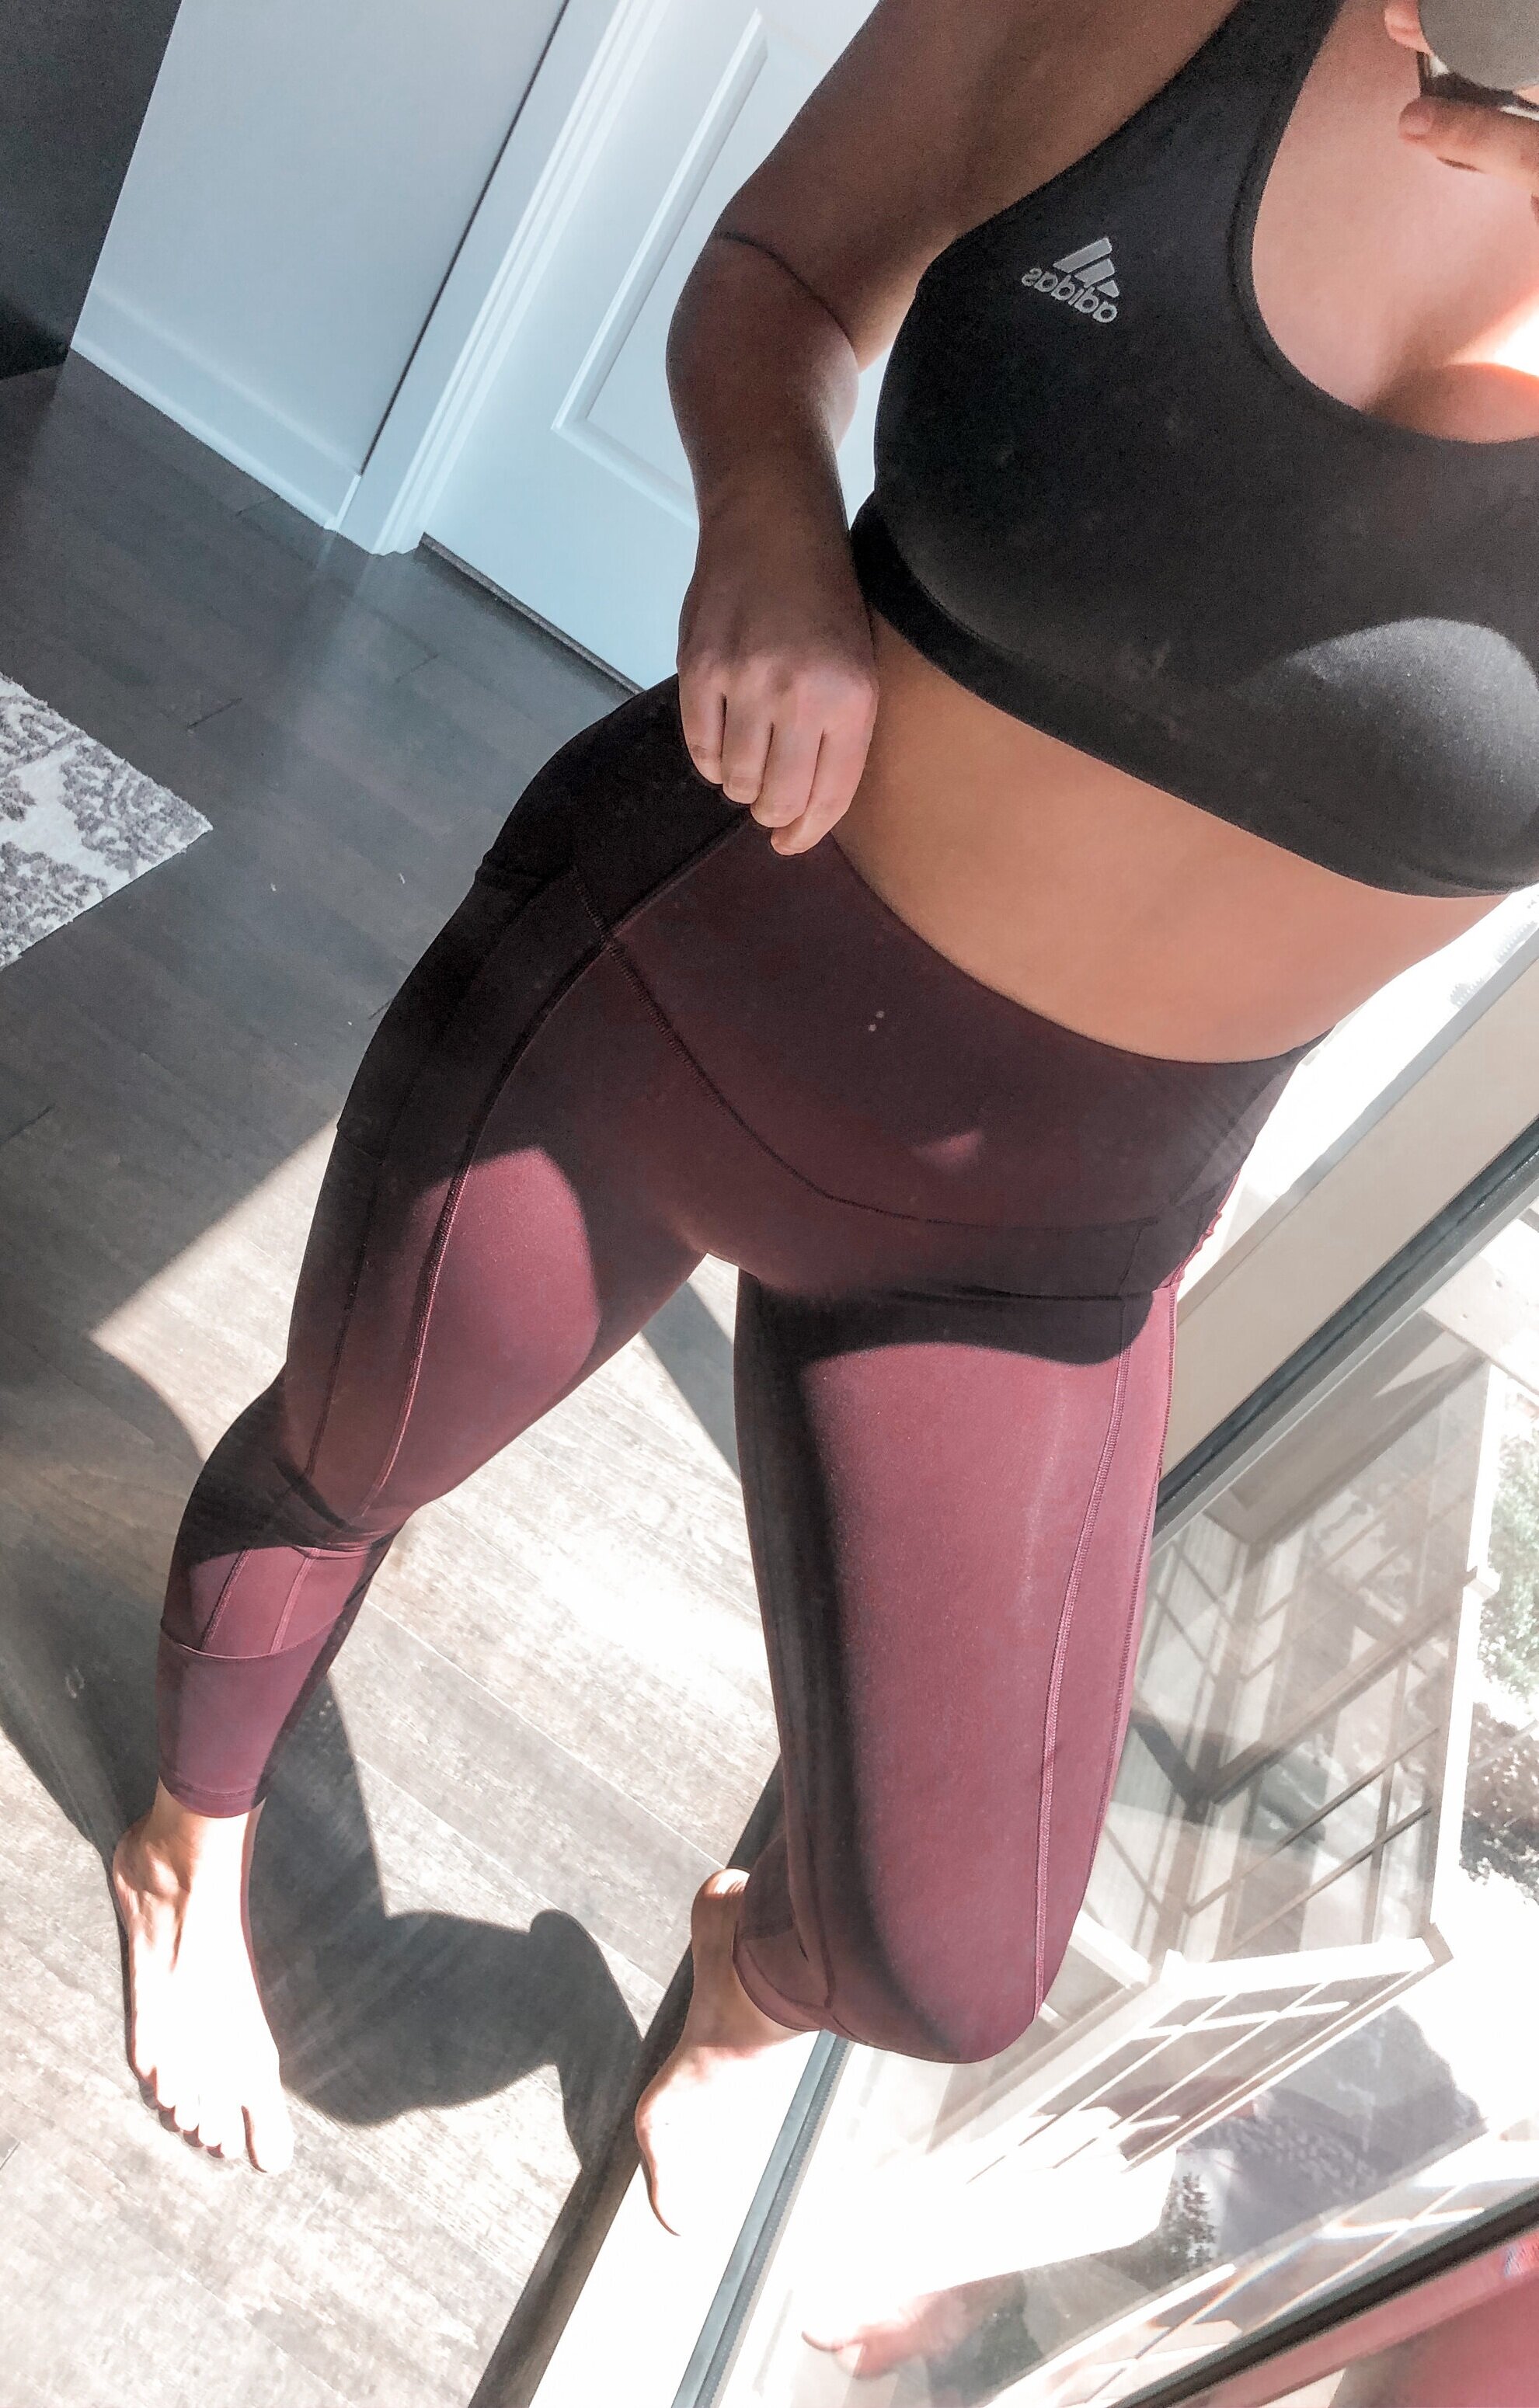 Which legging styles have decorative edges like the tight stuff